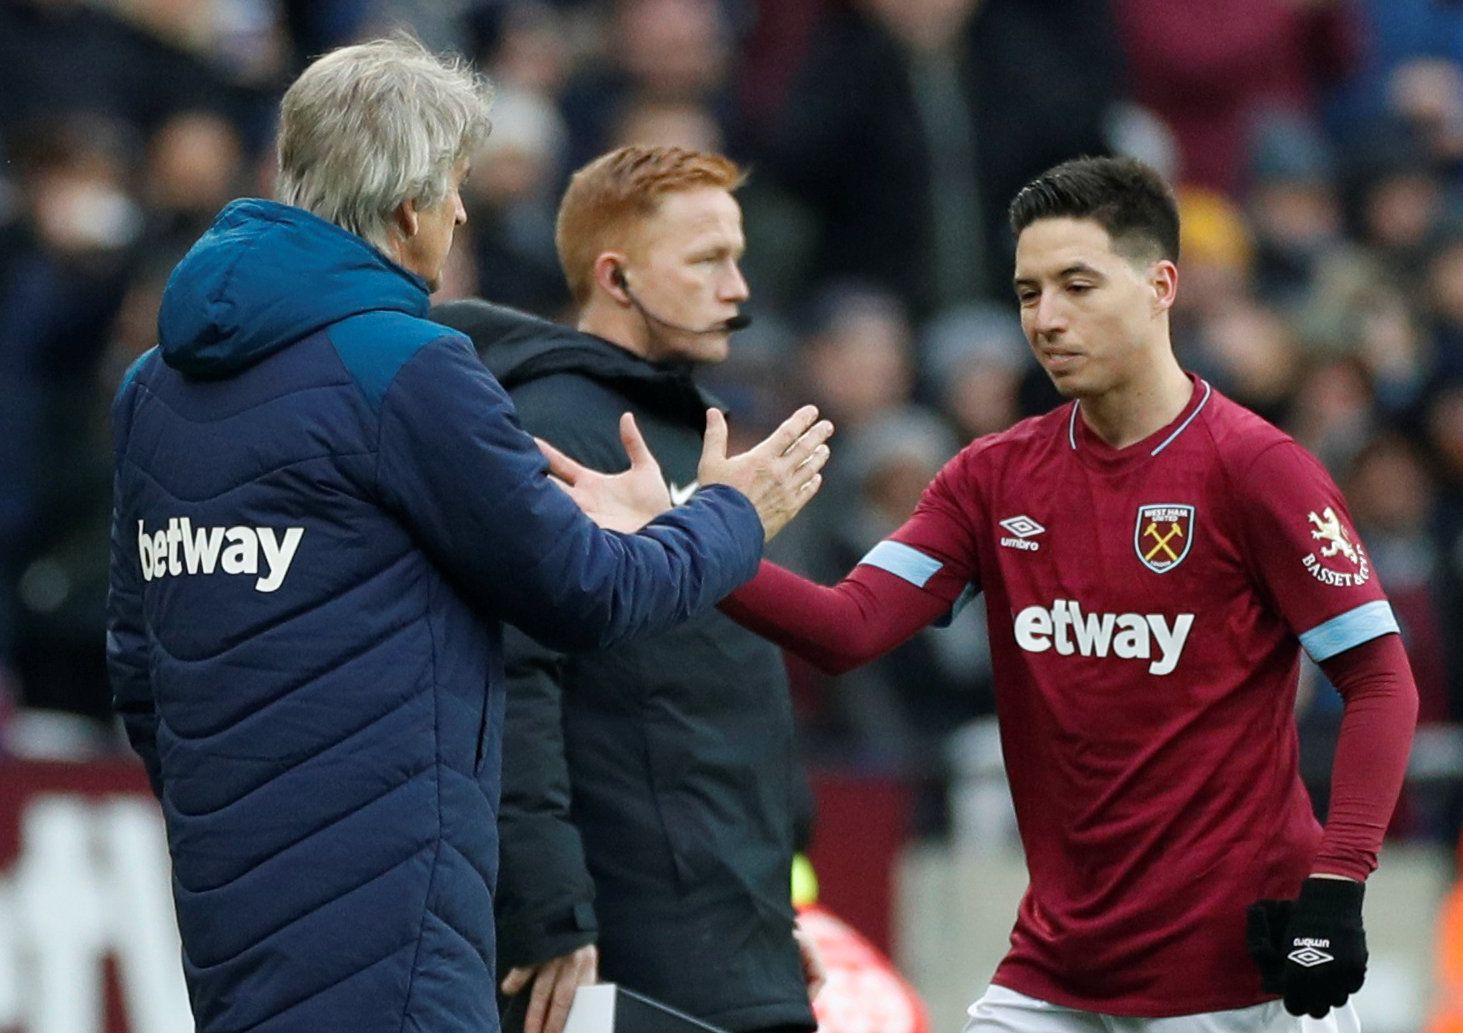 Soccer Football - FA Cup Third Round - West Ham United v Birmingham City - London Stadium, London, Britain - January 5, 2019  West Ham's Samir Nasri is substituted off as West Ham manager Manuel Pellegrini looks on               Action Images via Reuters/John Sibley